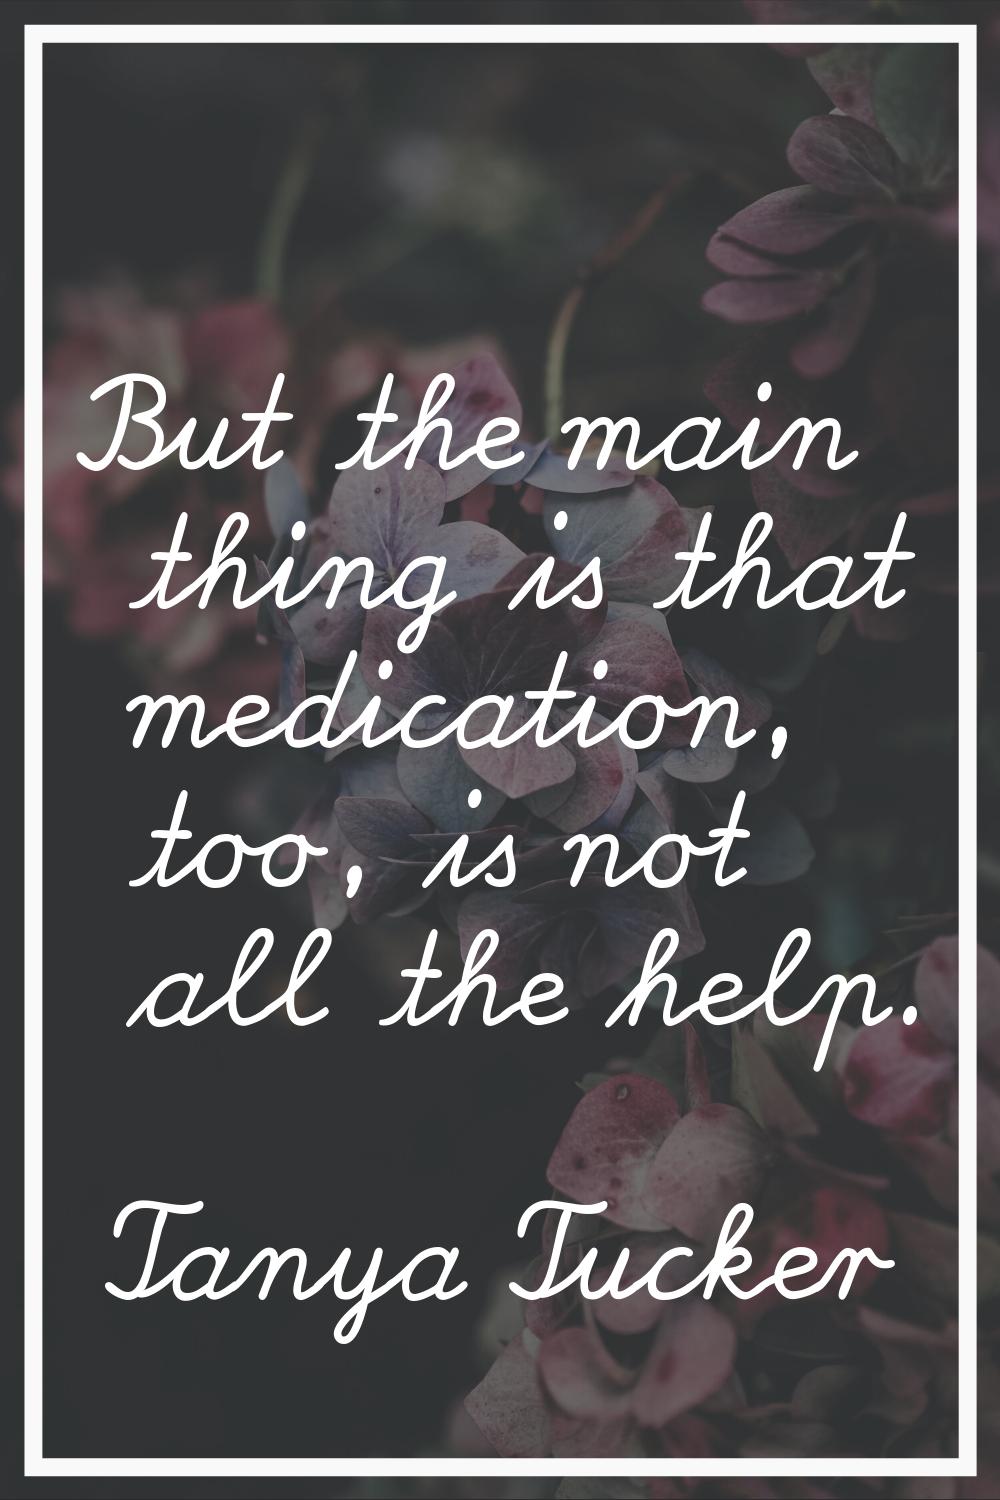 But the main thing is that medication, too, is not all the help.